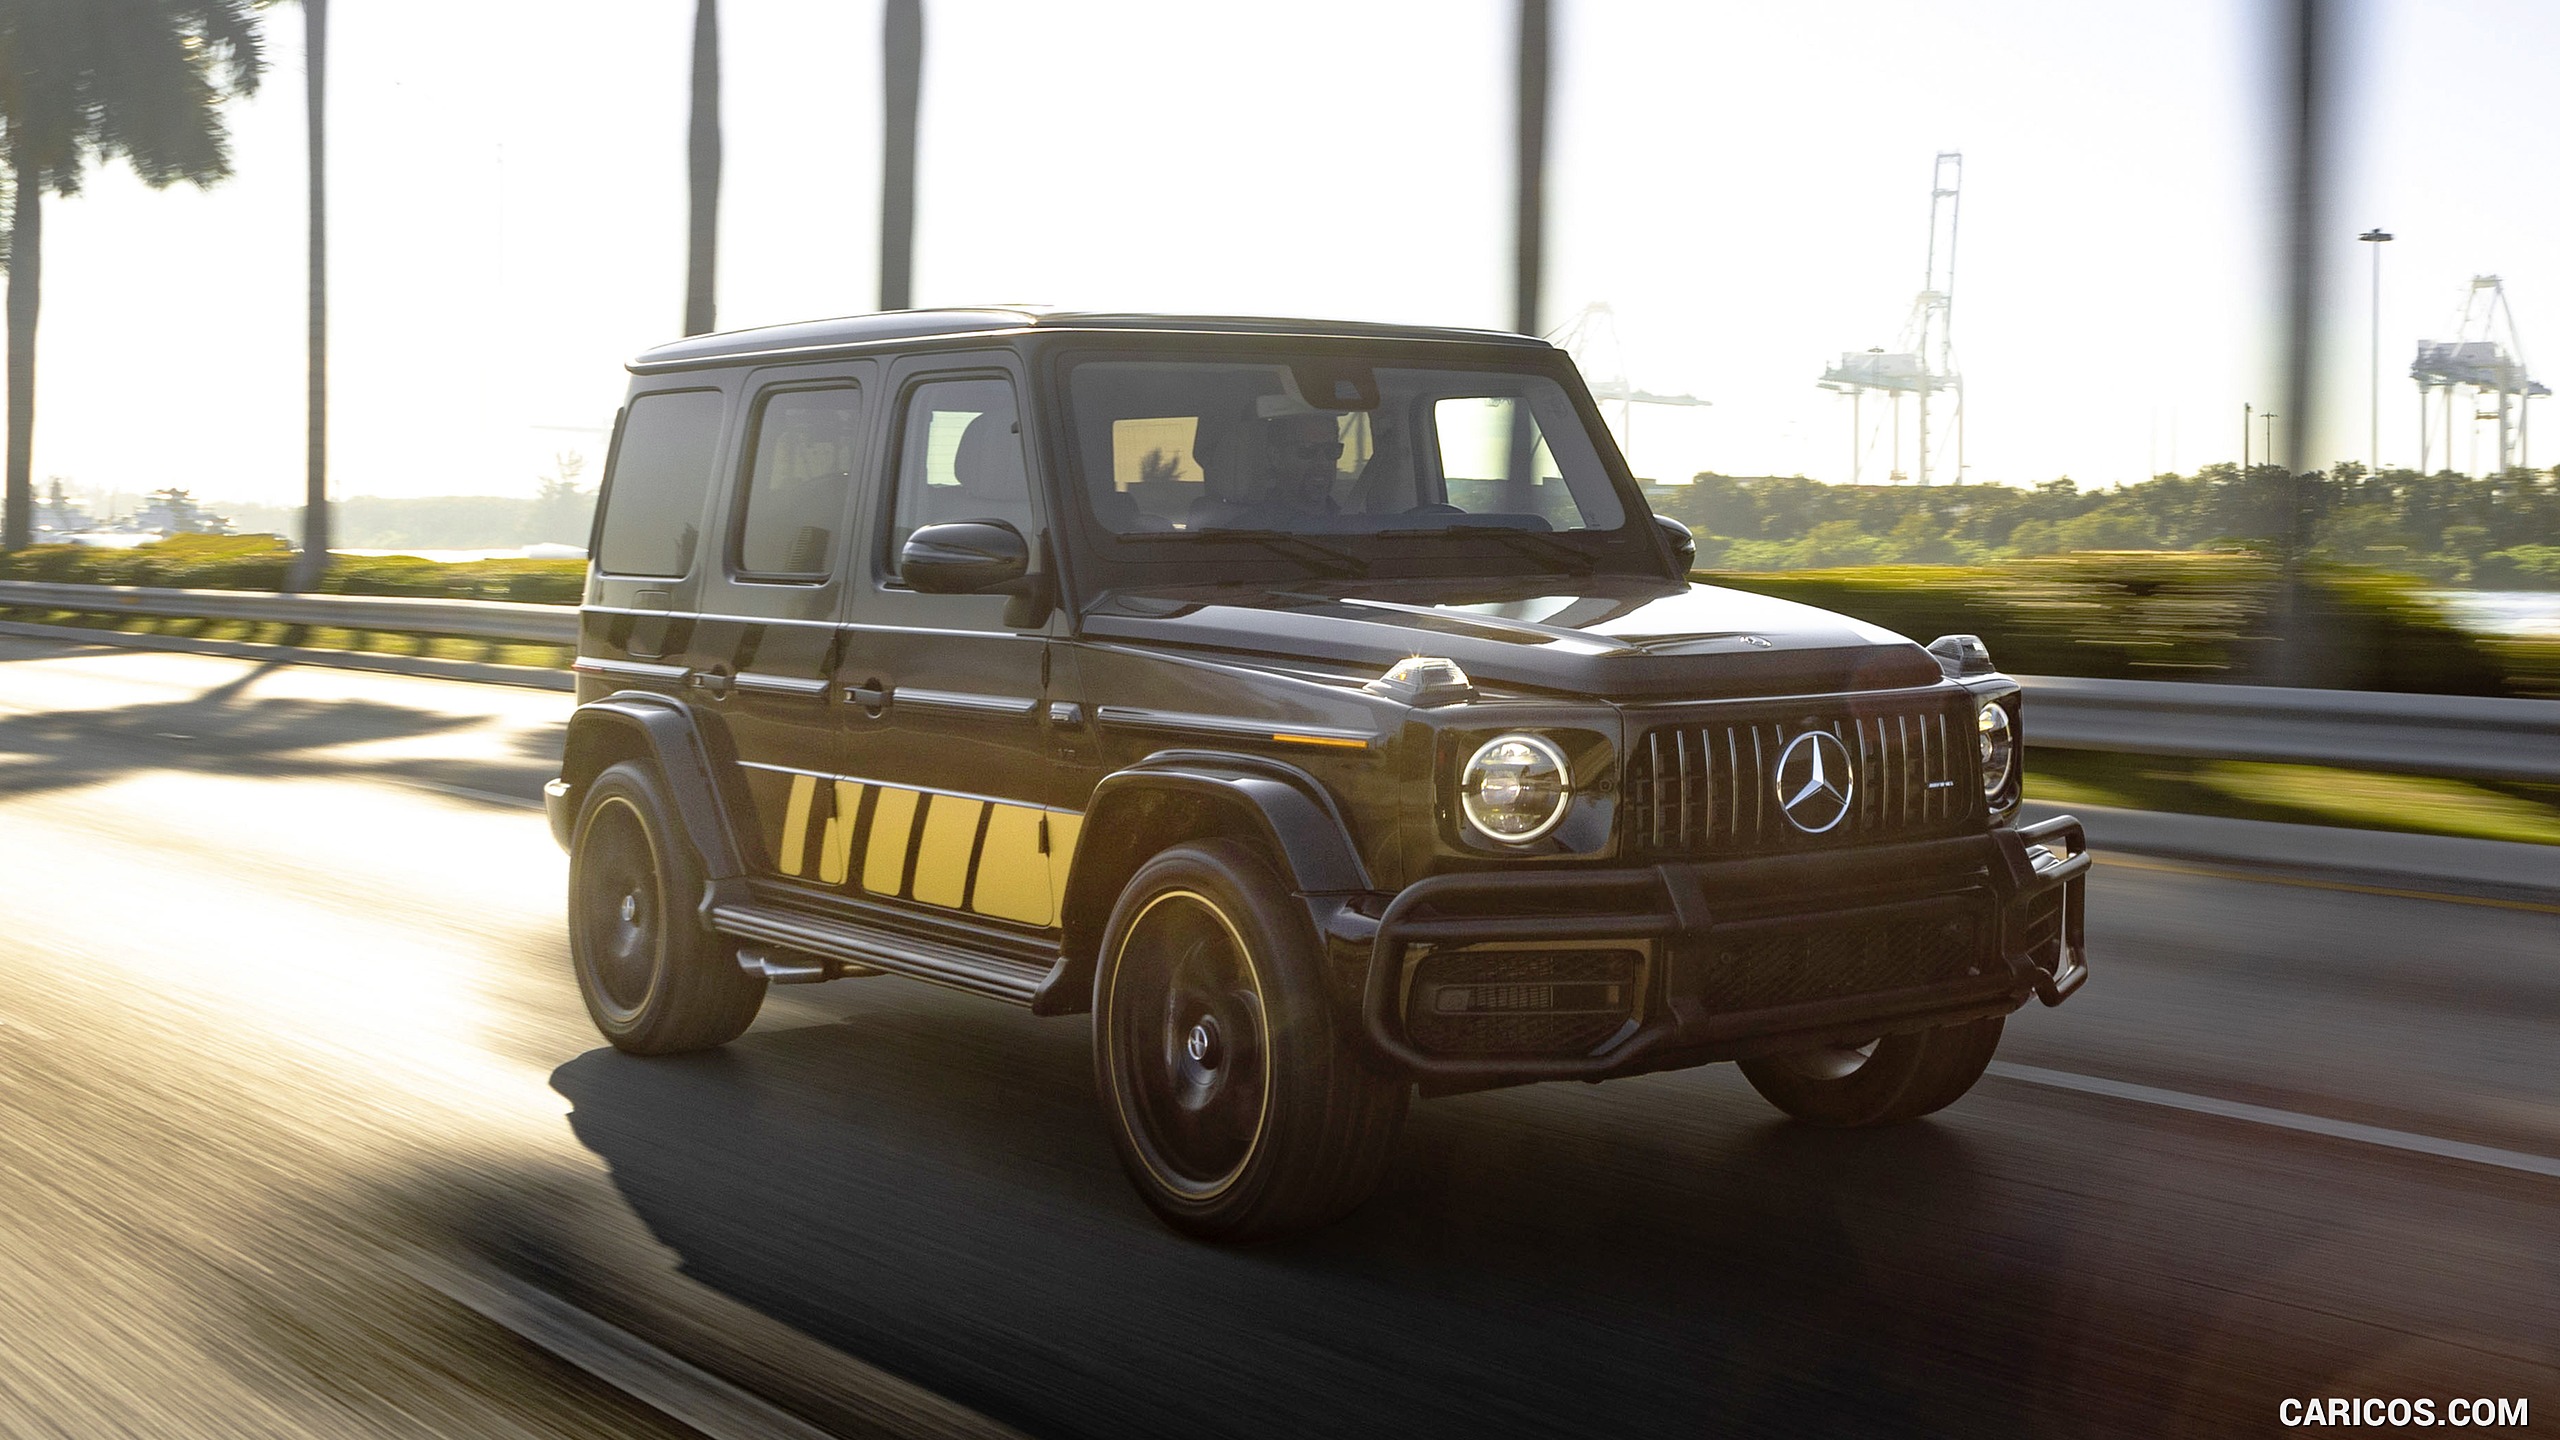 2020 Mercedes-AMG G 63 Cigarette Edition - Front Three-Quarter, #3 of 14